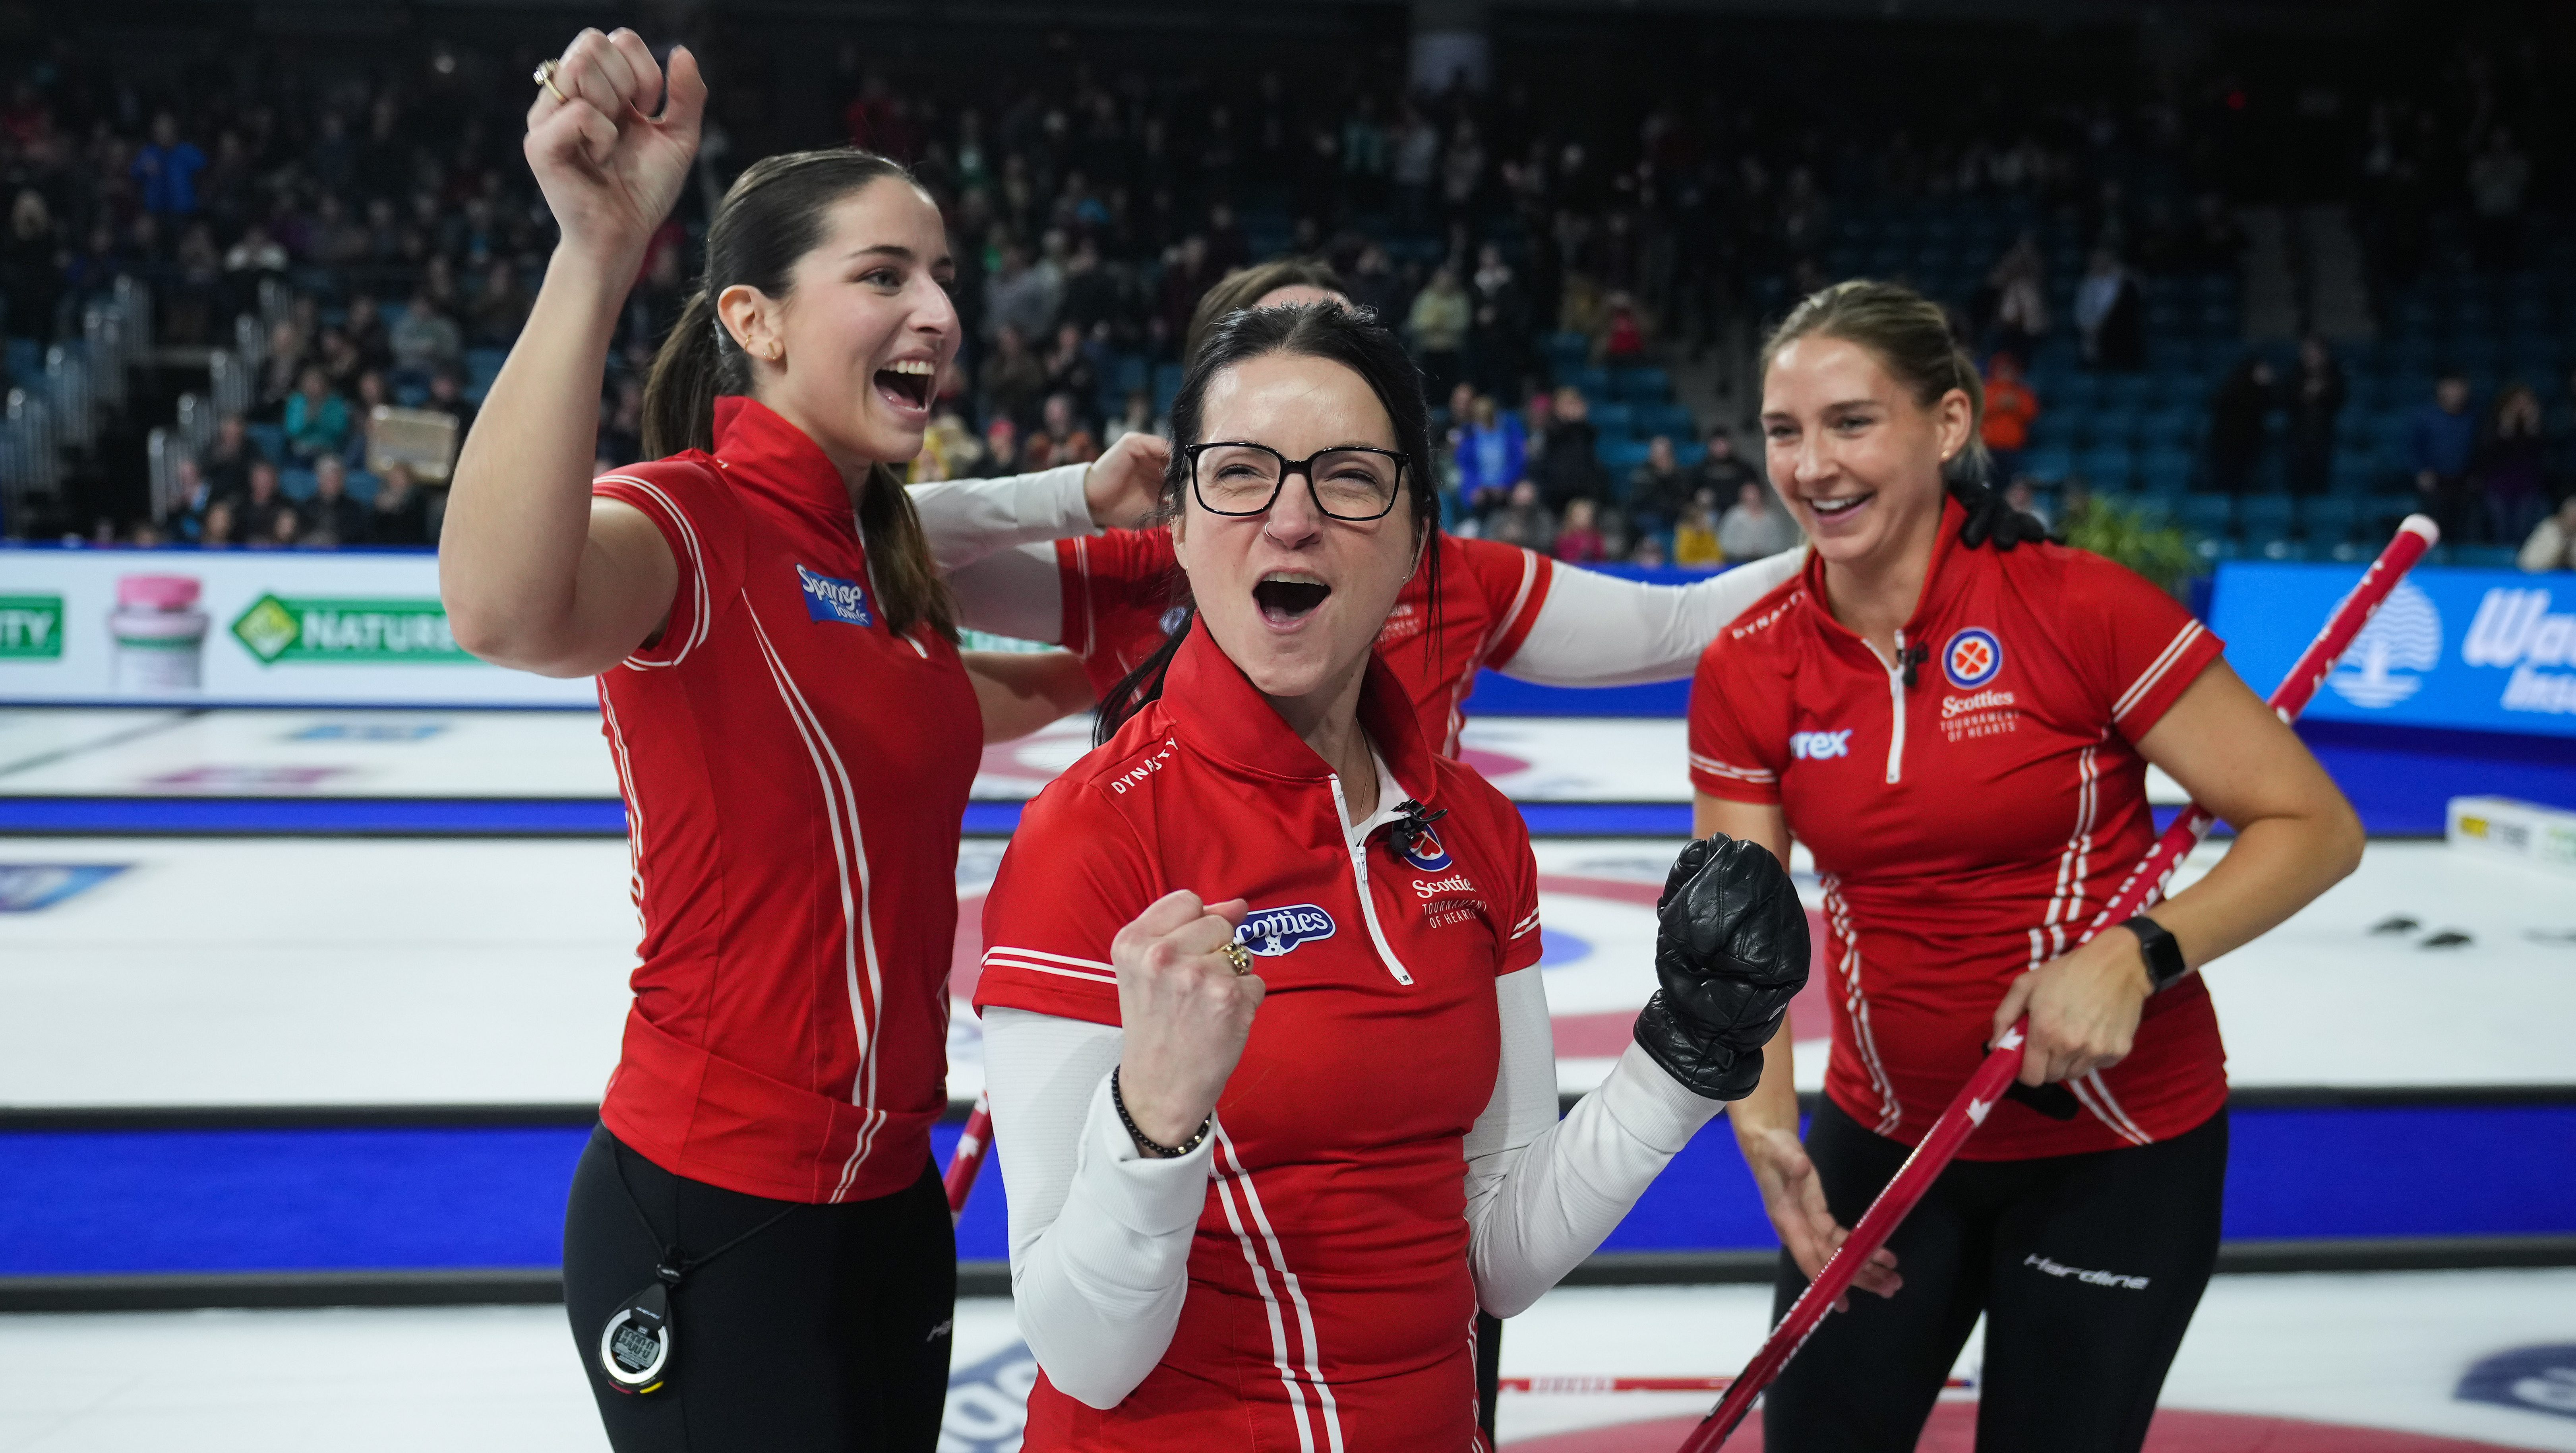 5 Team Canada things to watch this weekend March 17-19 - Team Canada